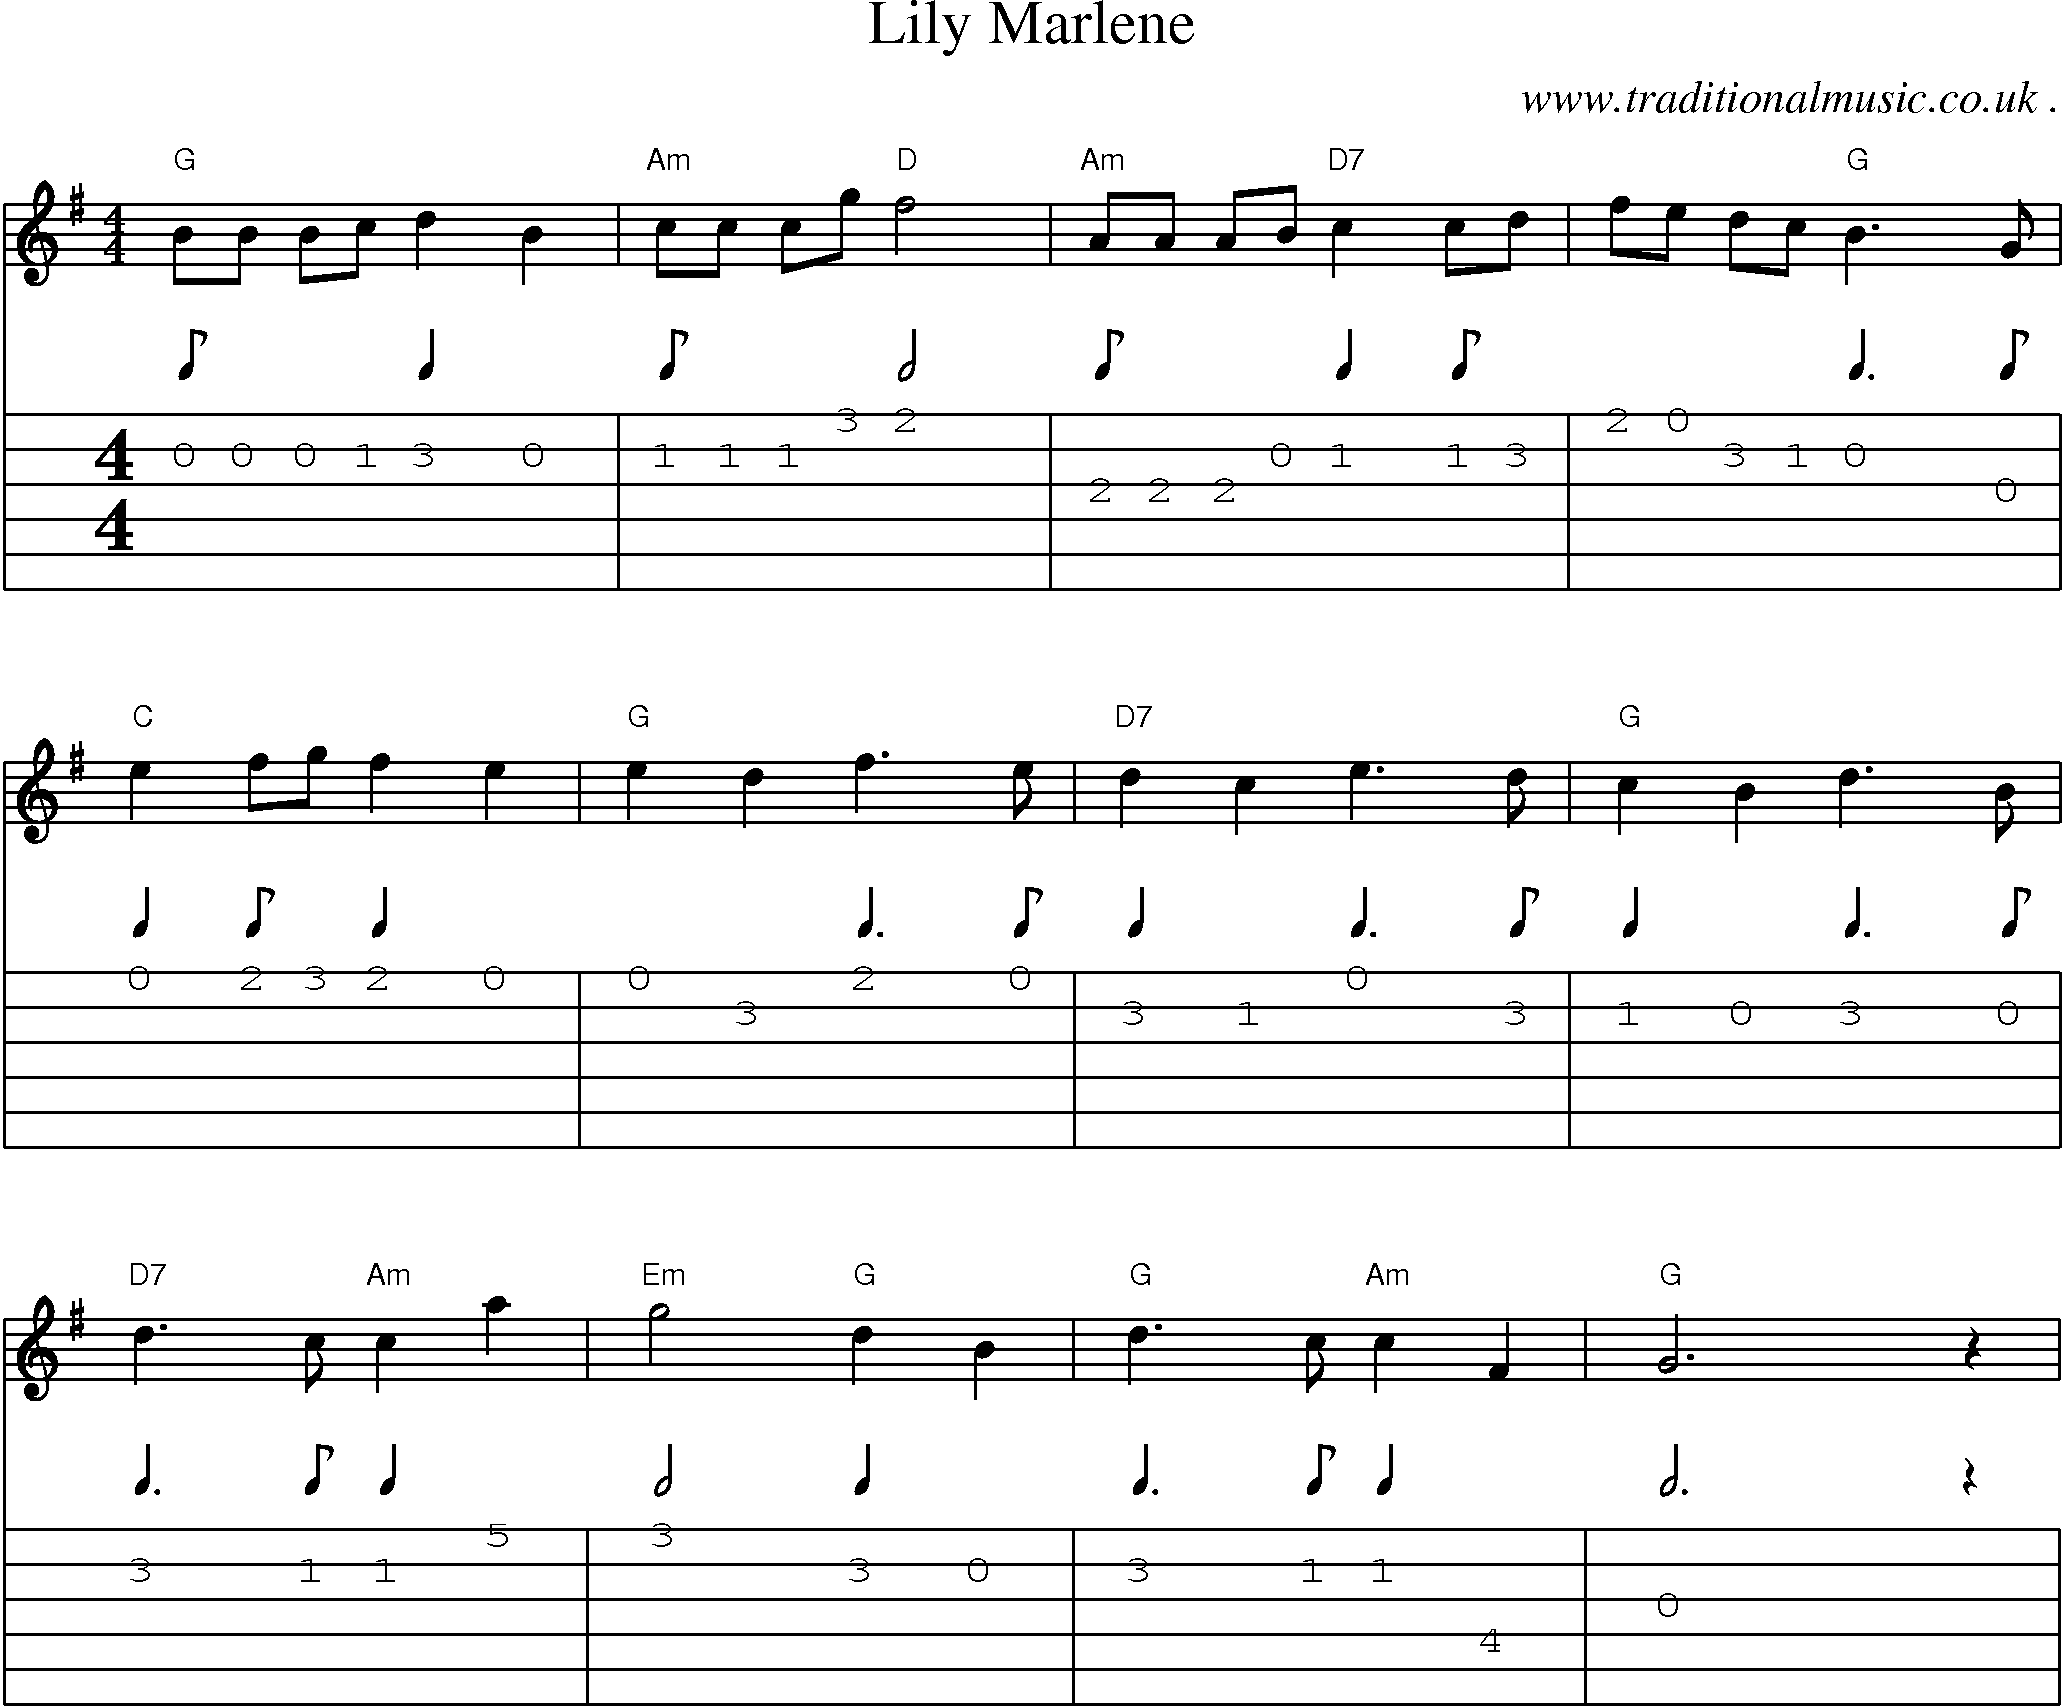 Music Score and Guitar Tabs for Lily Marlene